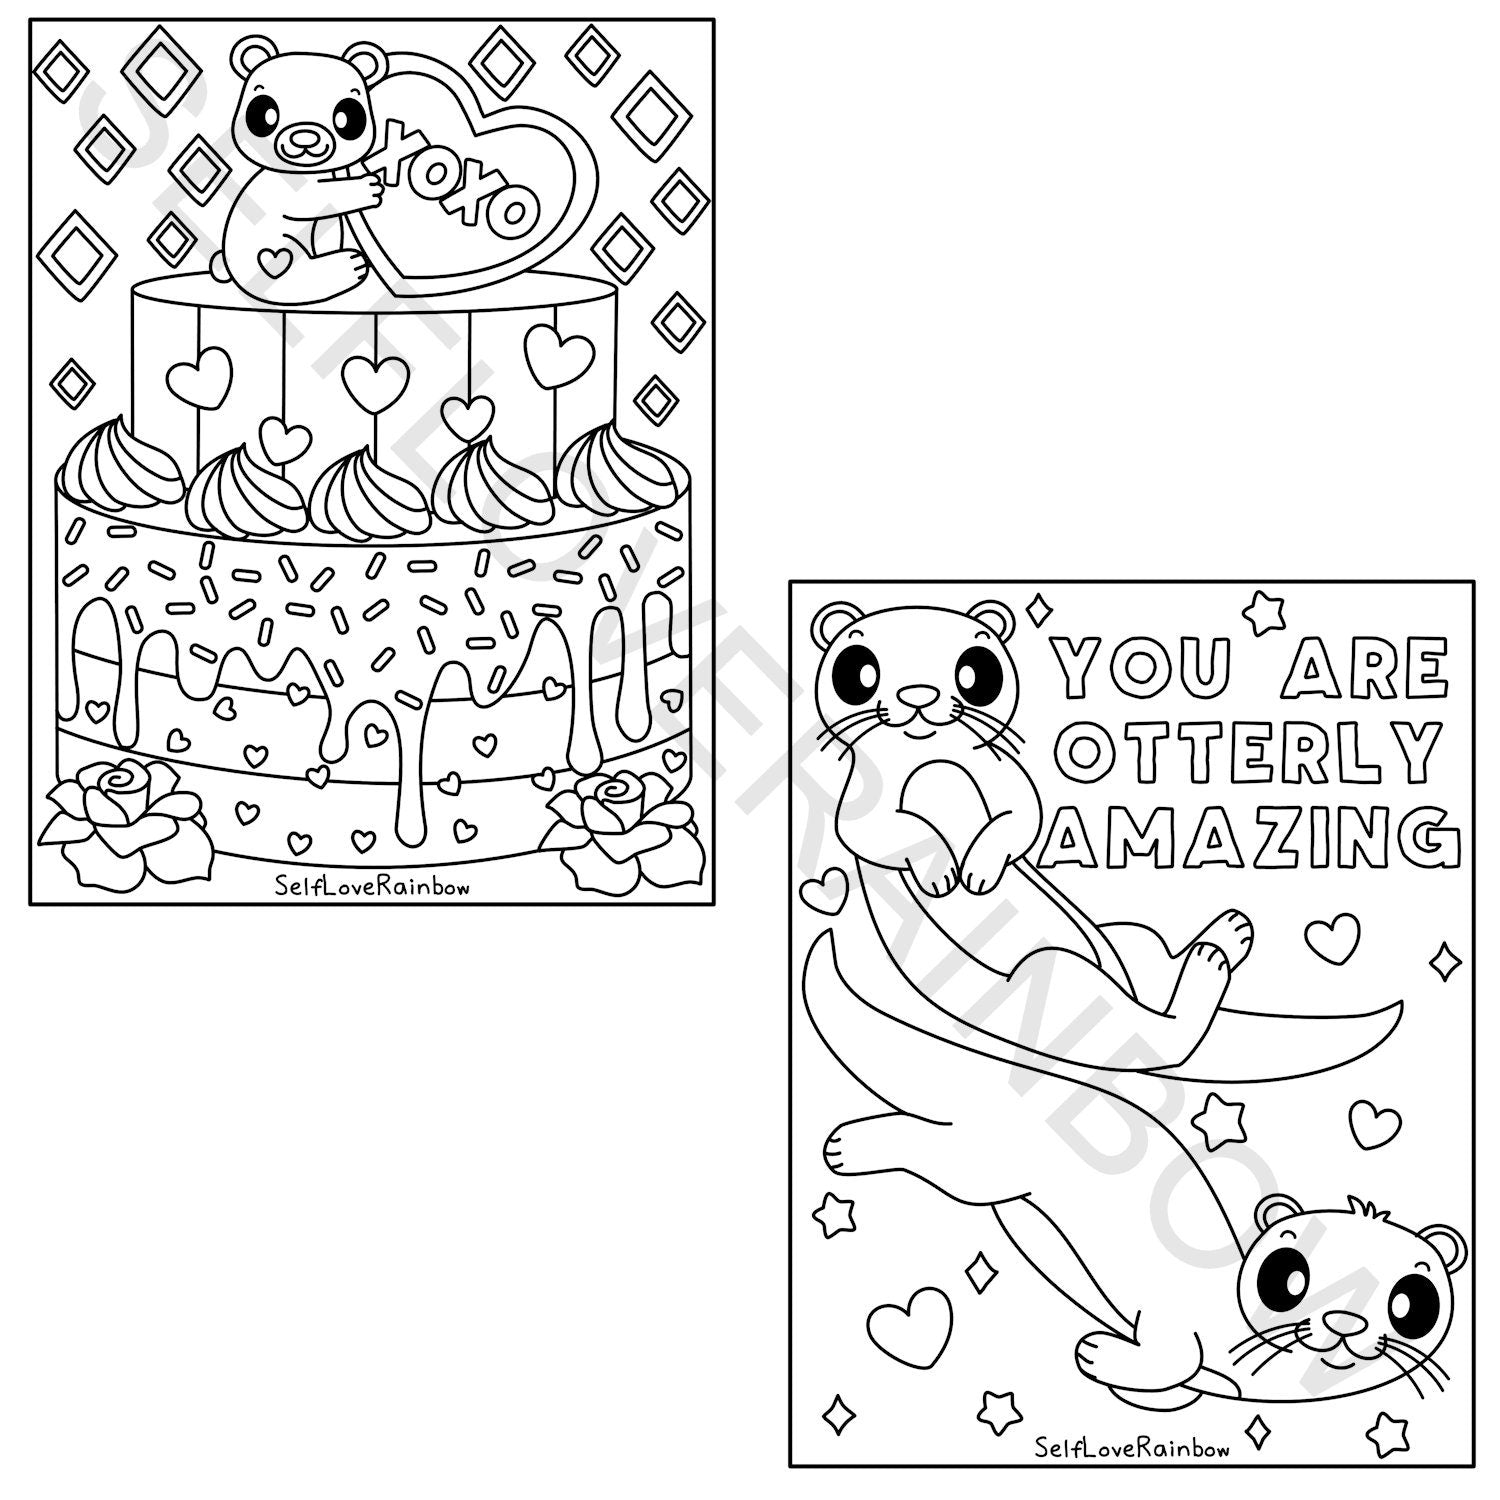 Self-Love Coloring Pages